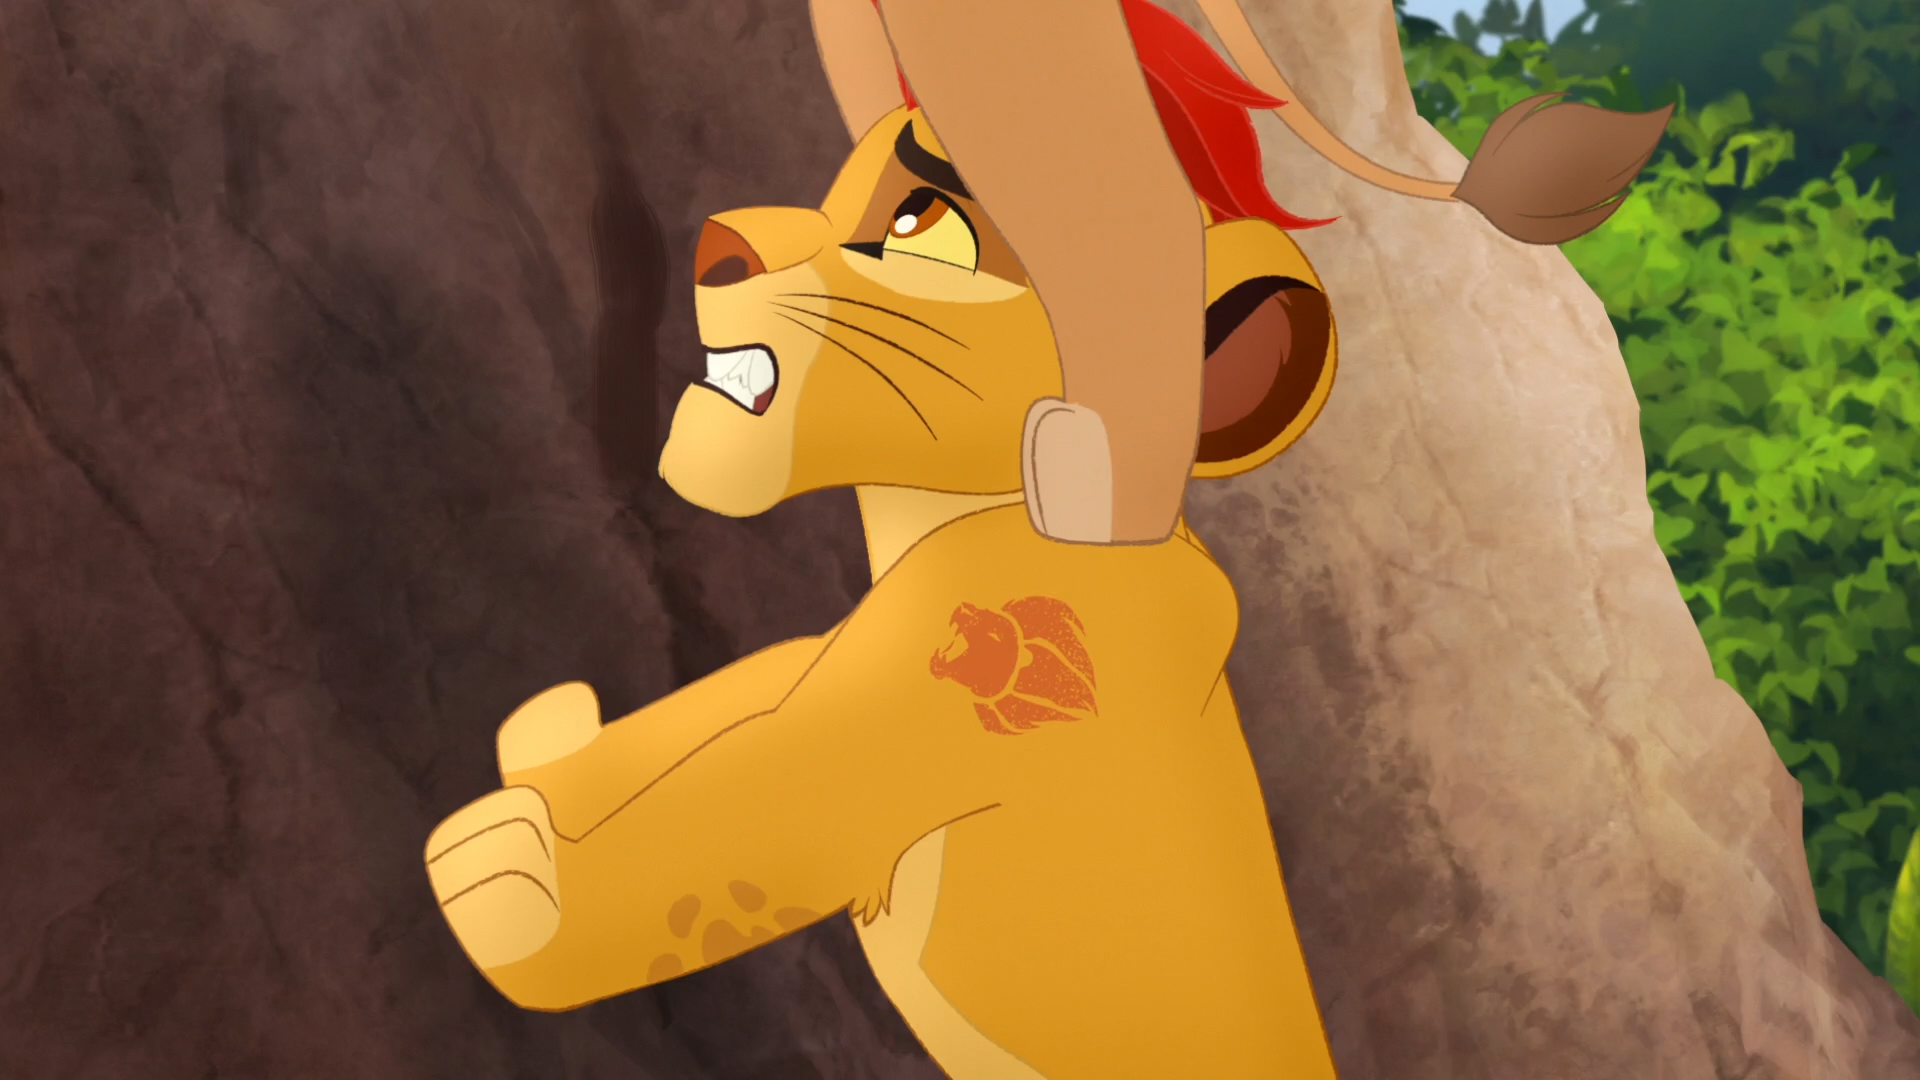 Image 2017 01 08 20 34 23png The Lion King Wiki Fandom Powered By Wikia 0774